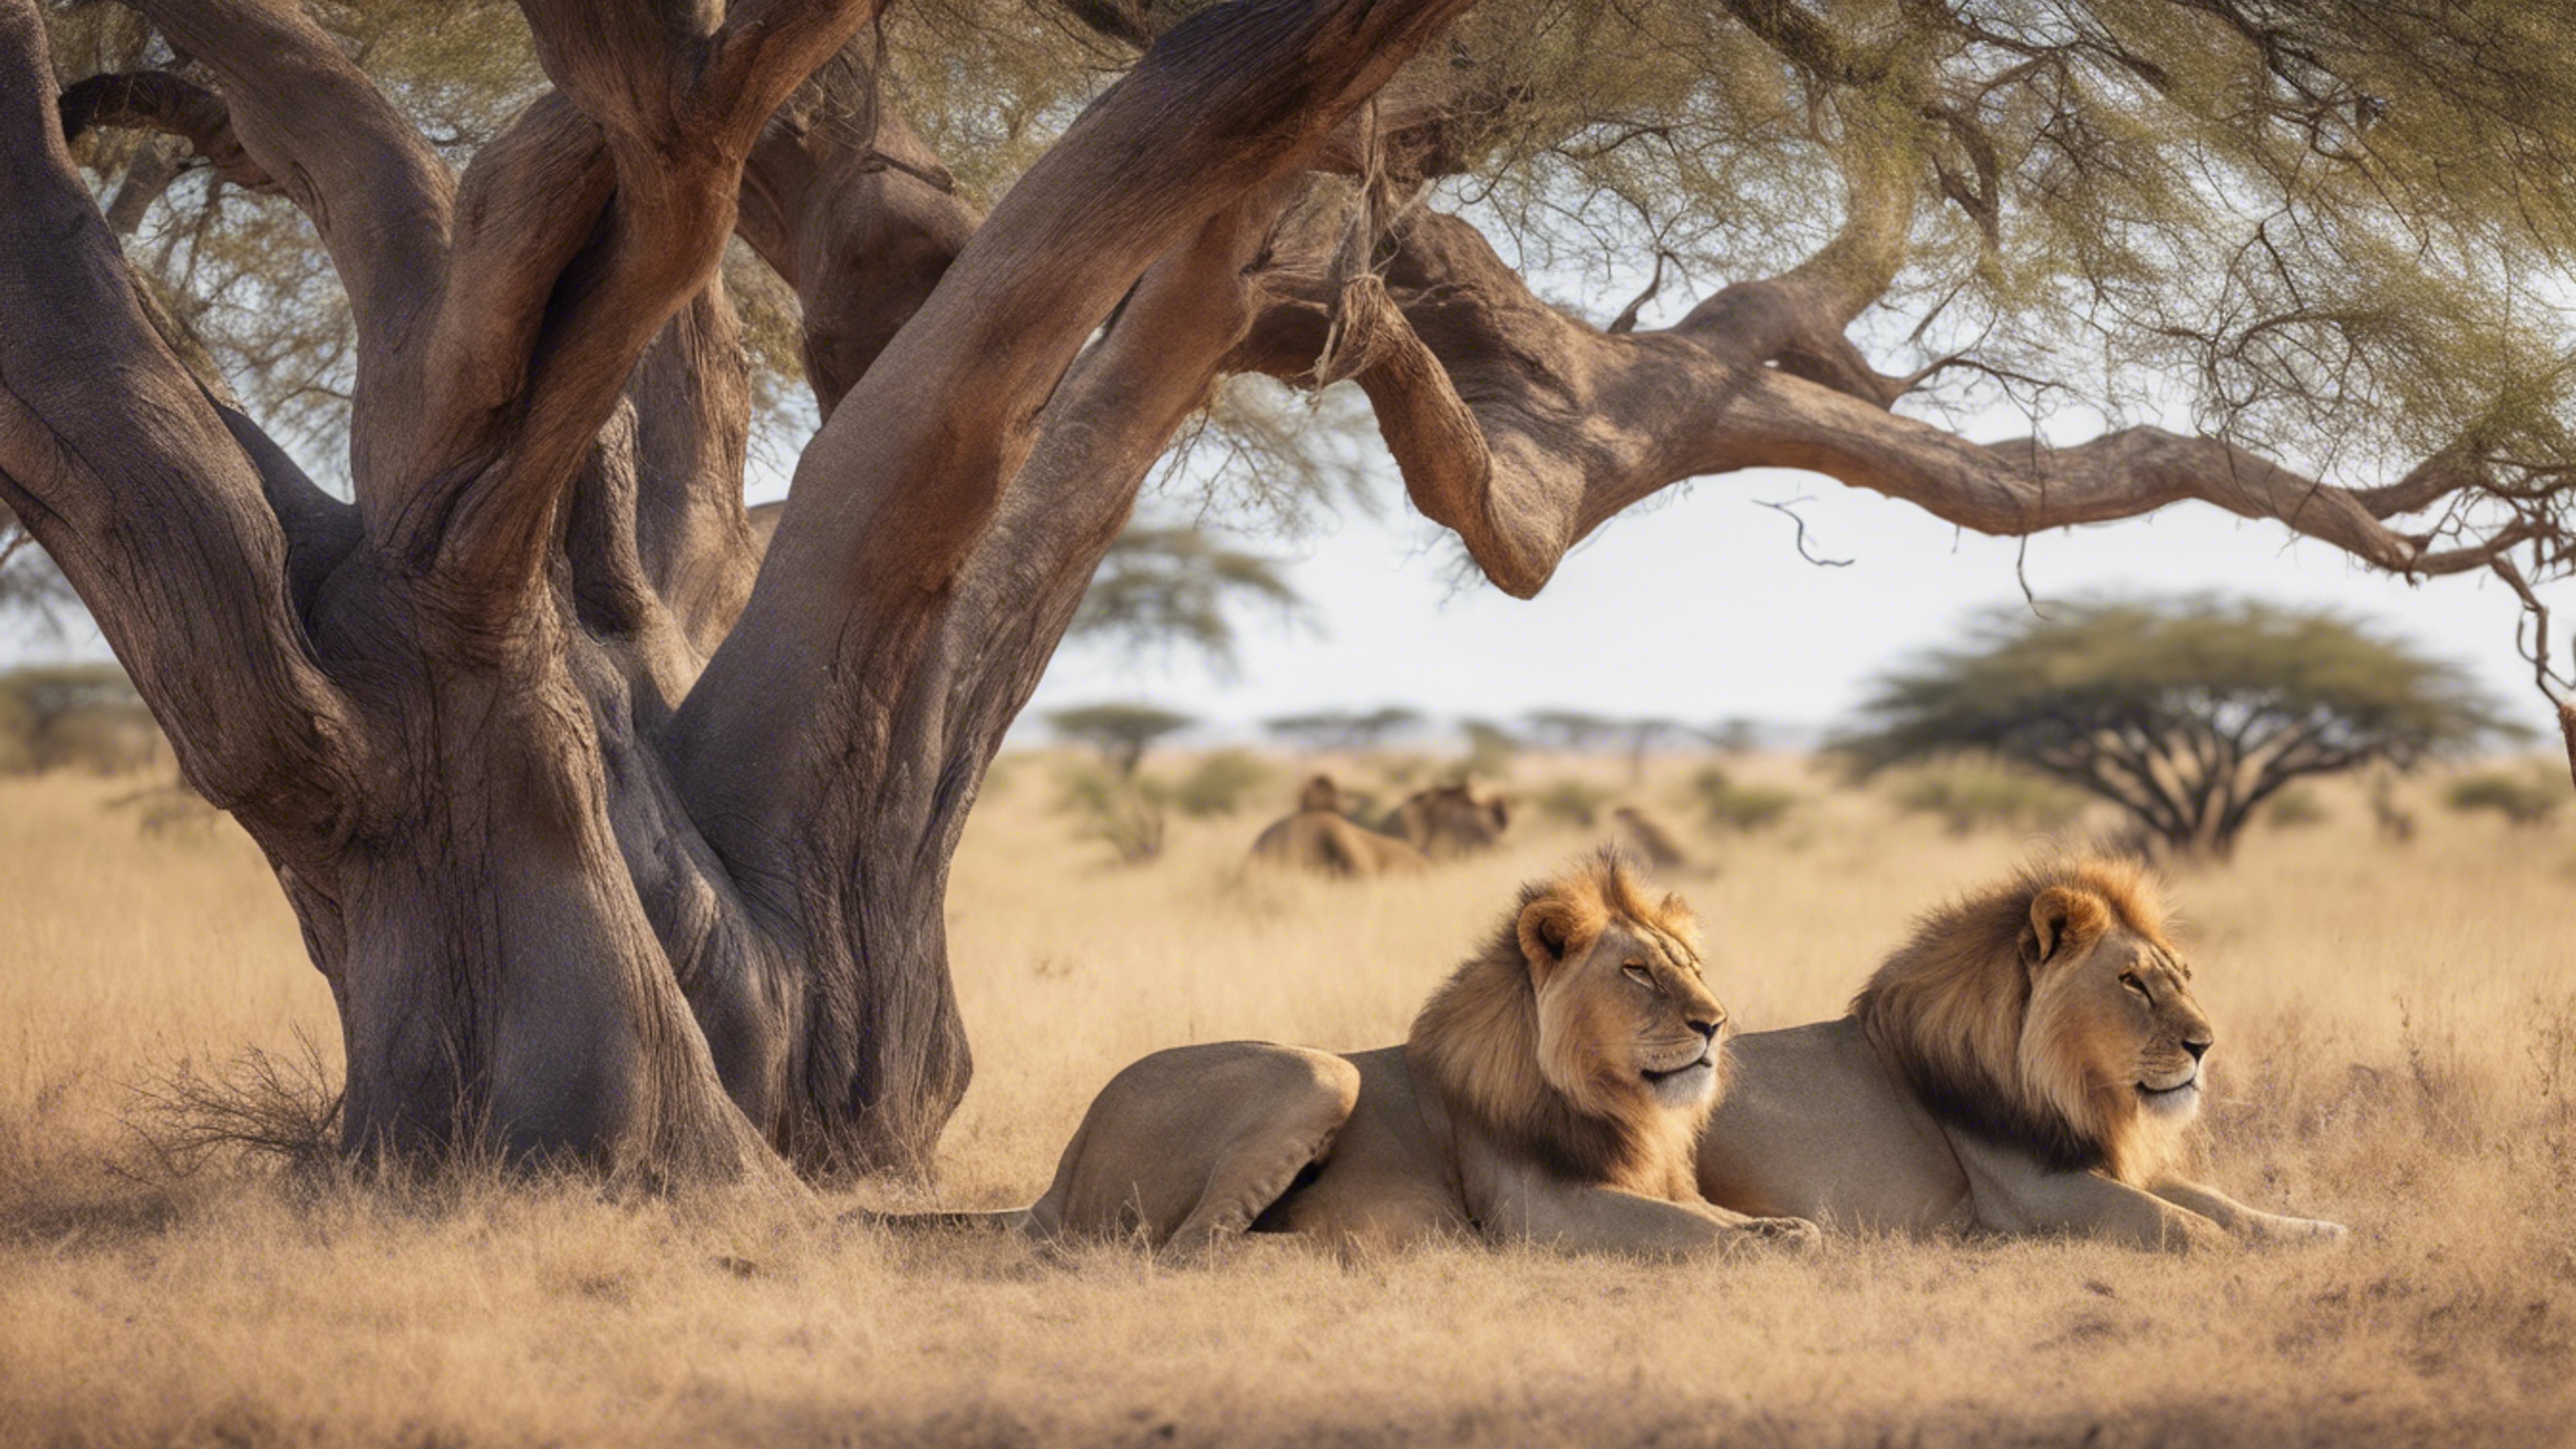 A large pride of lions lounging lazily under a leafy acacia tree in the heart of the African savannah.壁紙[265e1c1f03ab4841baaf]